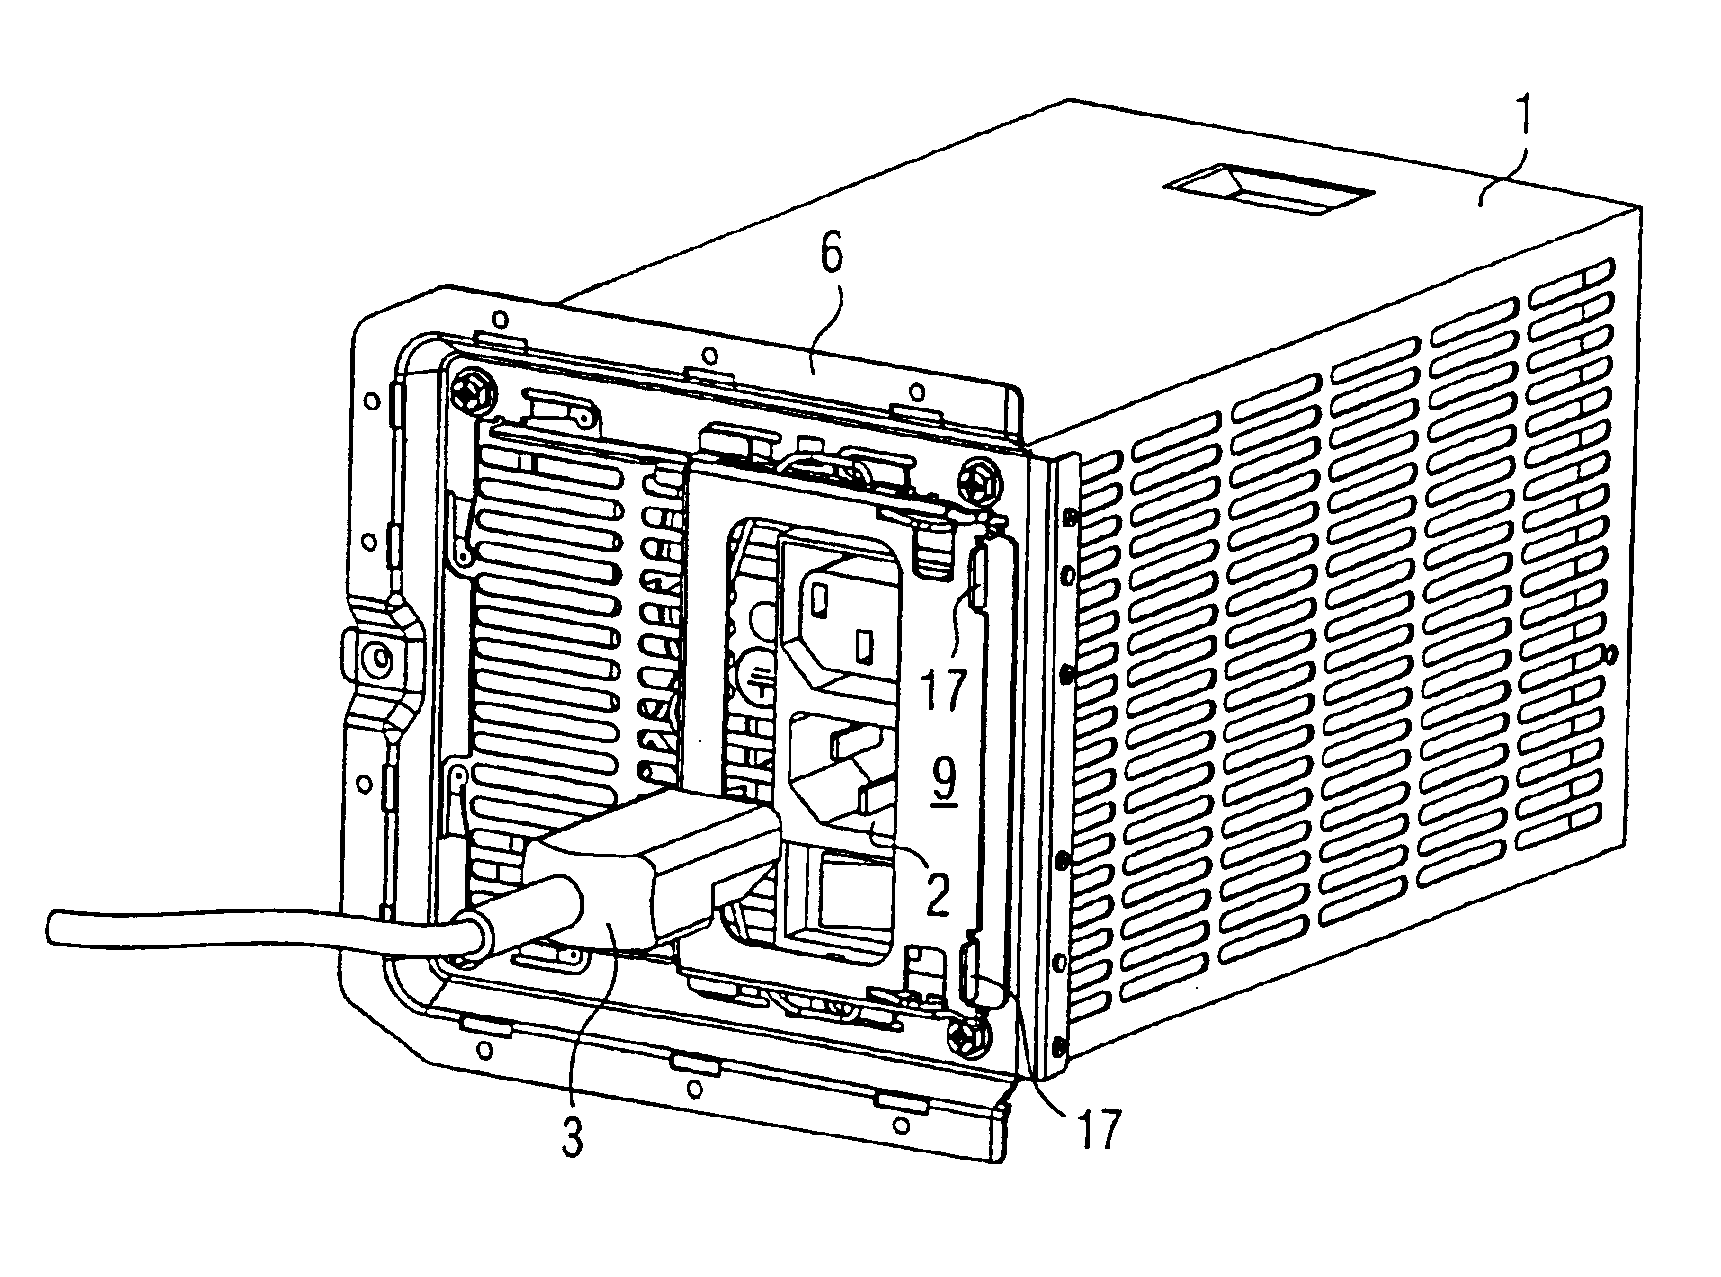 Power supply for an electrical appliance